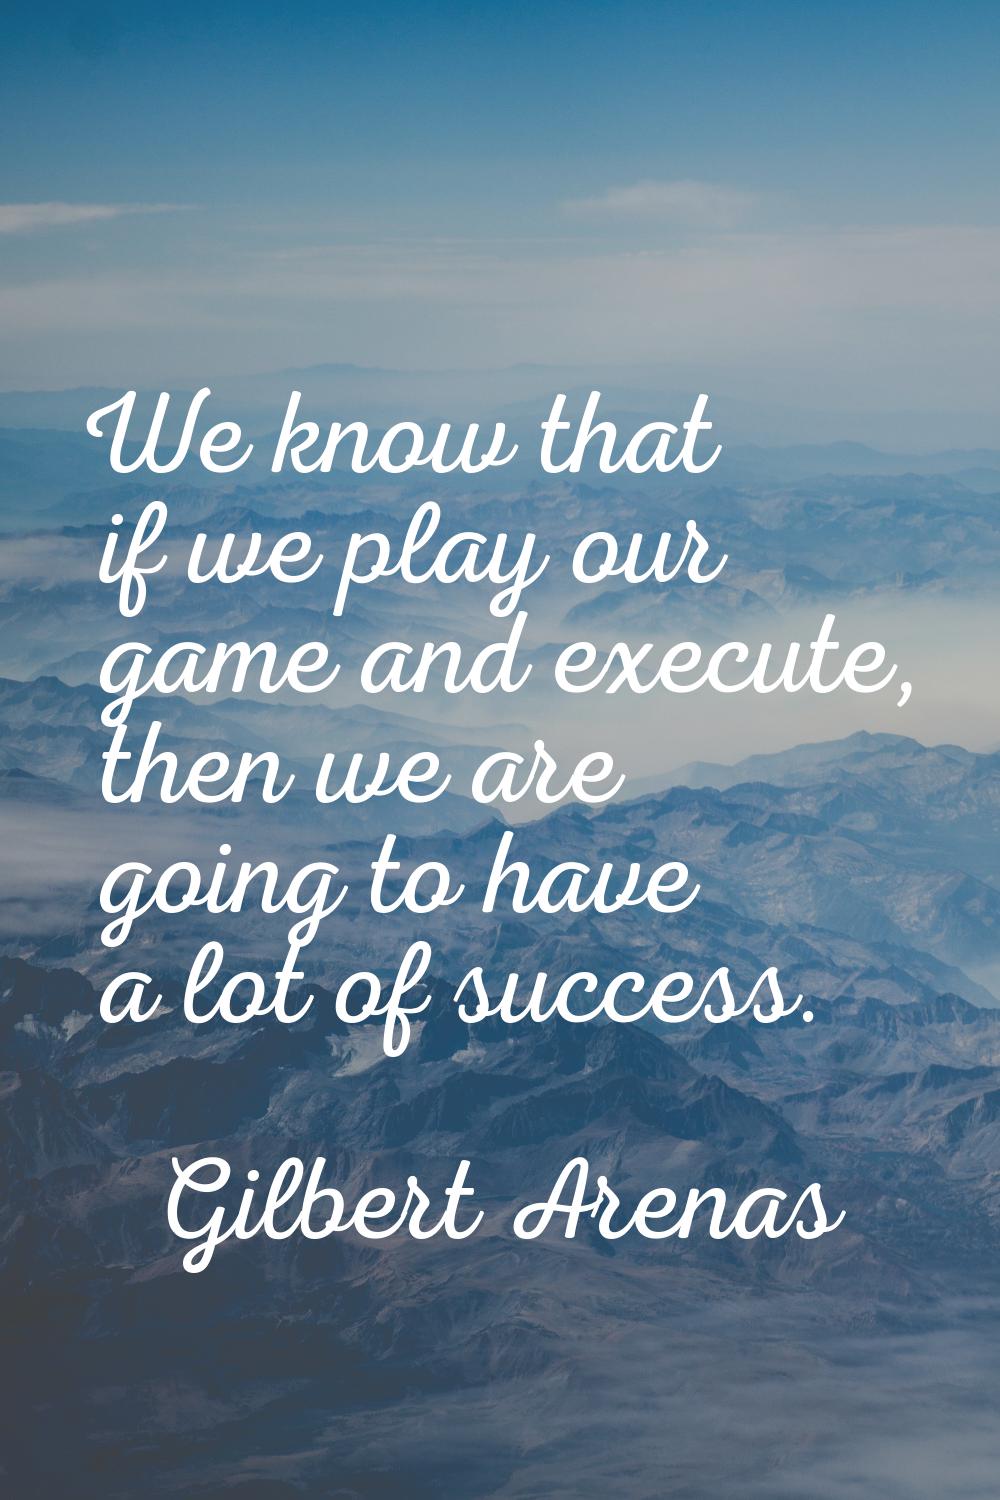 We know that if we play our game and execute, then we are going to have a lot of success.